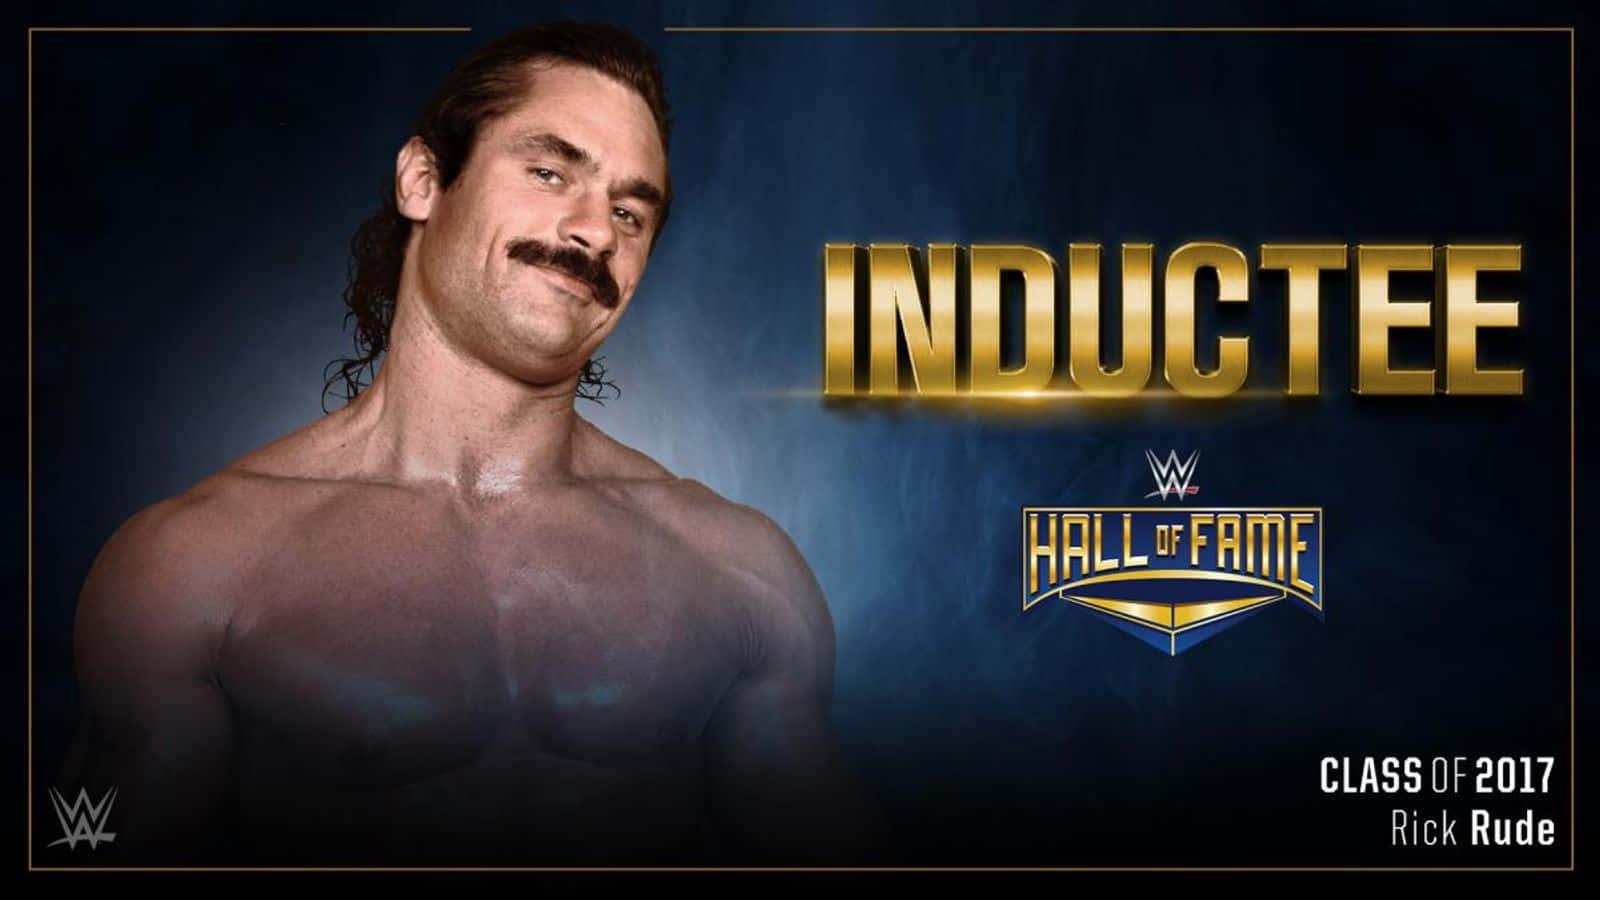 Rick Rude WWE Hall Of Fame Inductee Poster Photo Wallpaper